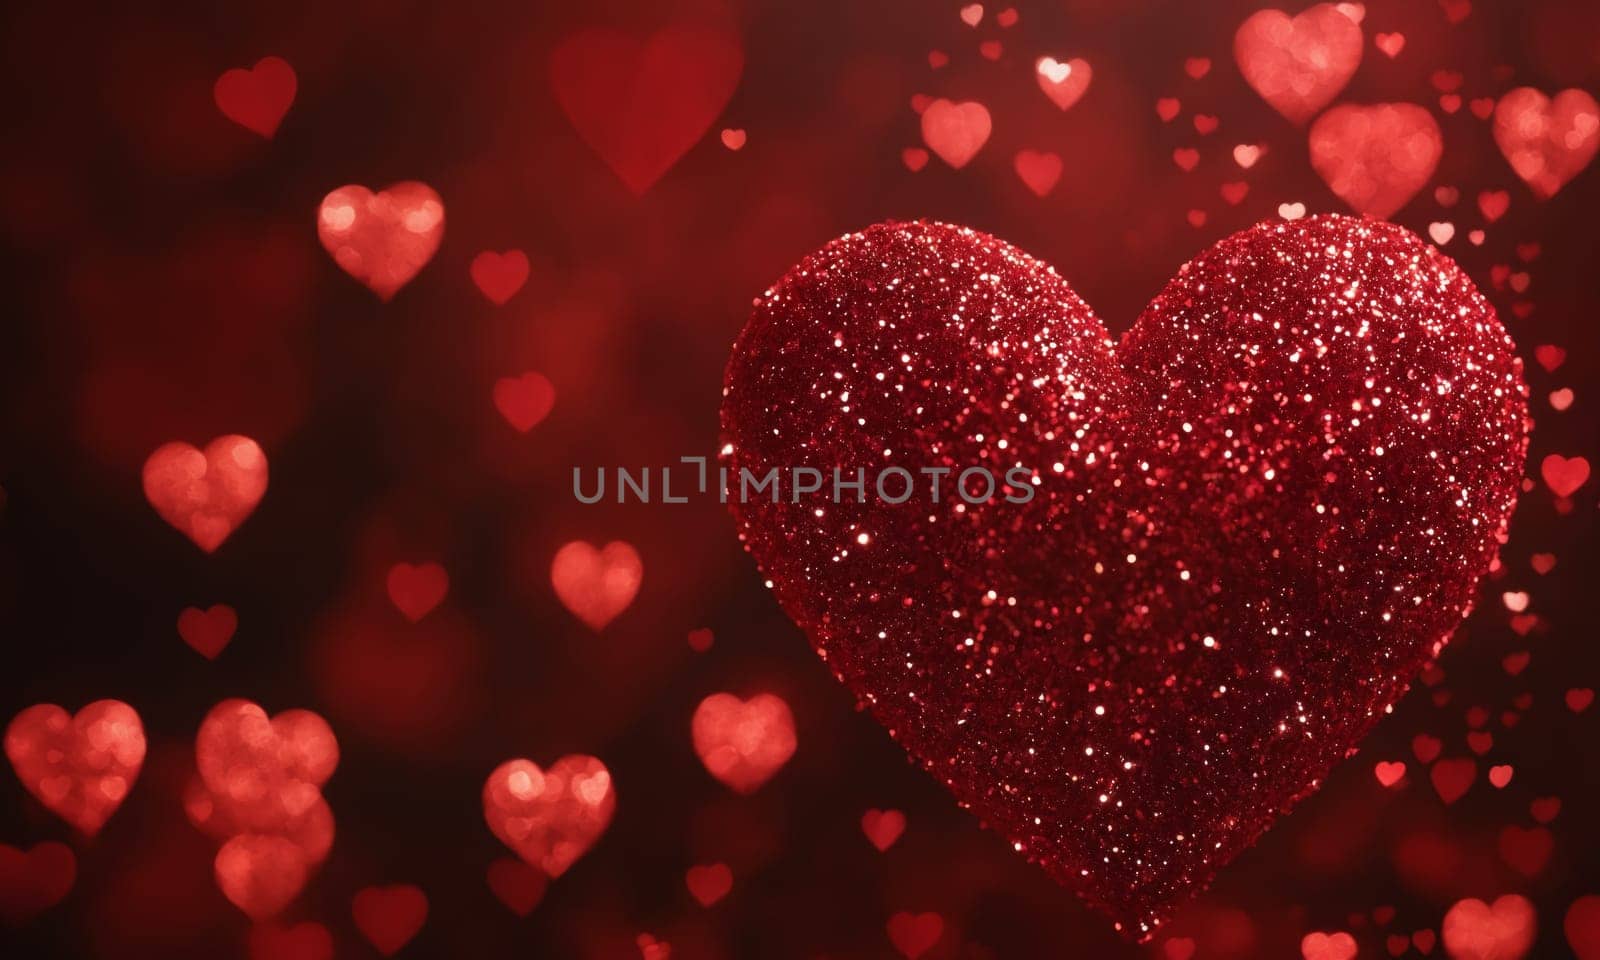 Glistening hearts rest amidst a shower of smaller heart shapes. The radiant glow and the deep red hue evoke a sense of warmth and affection. Ideal for expressing love and romance.